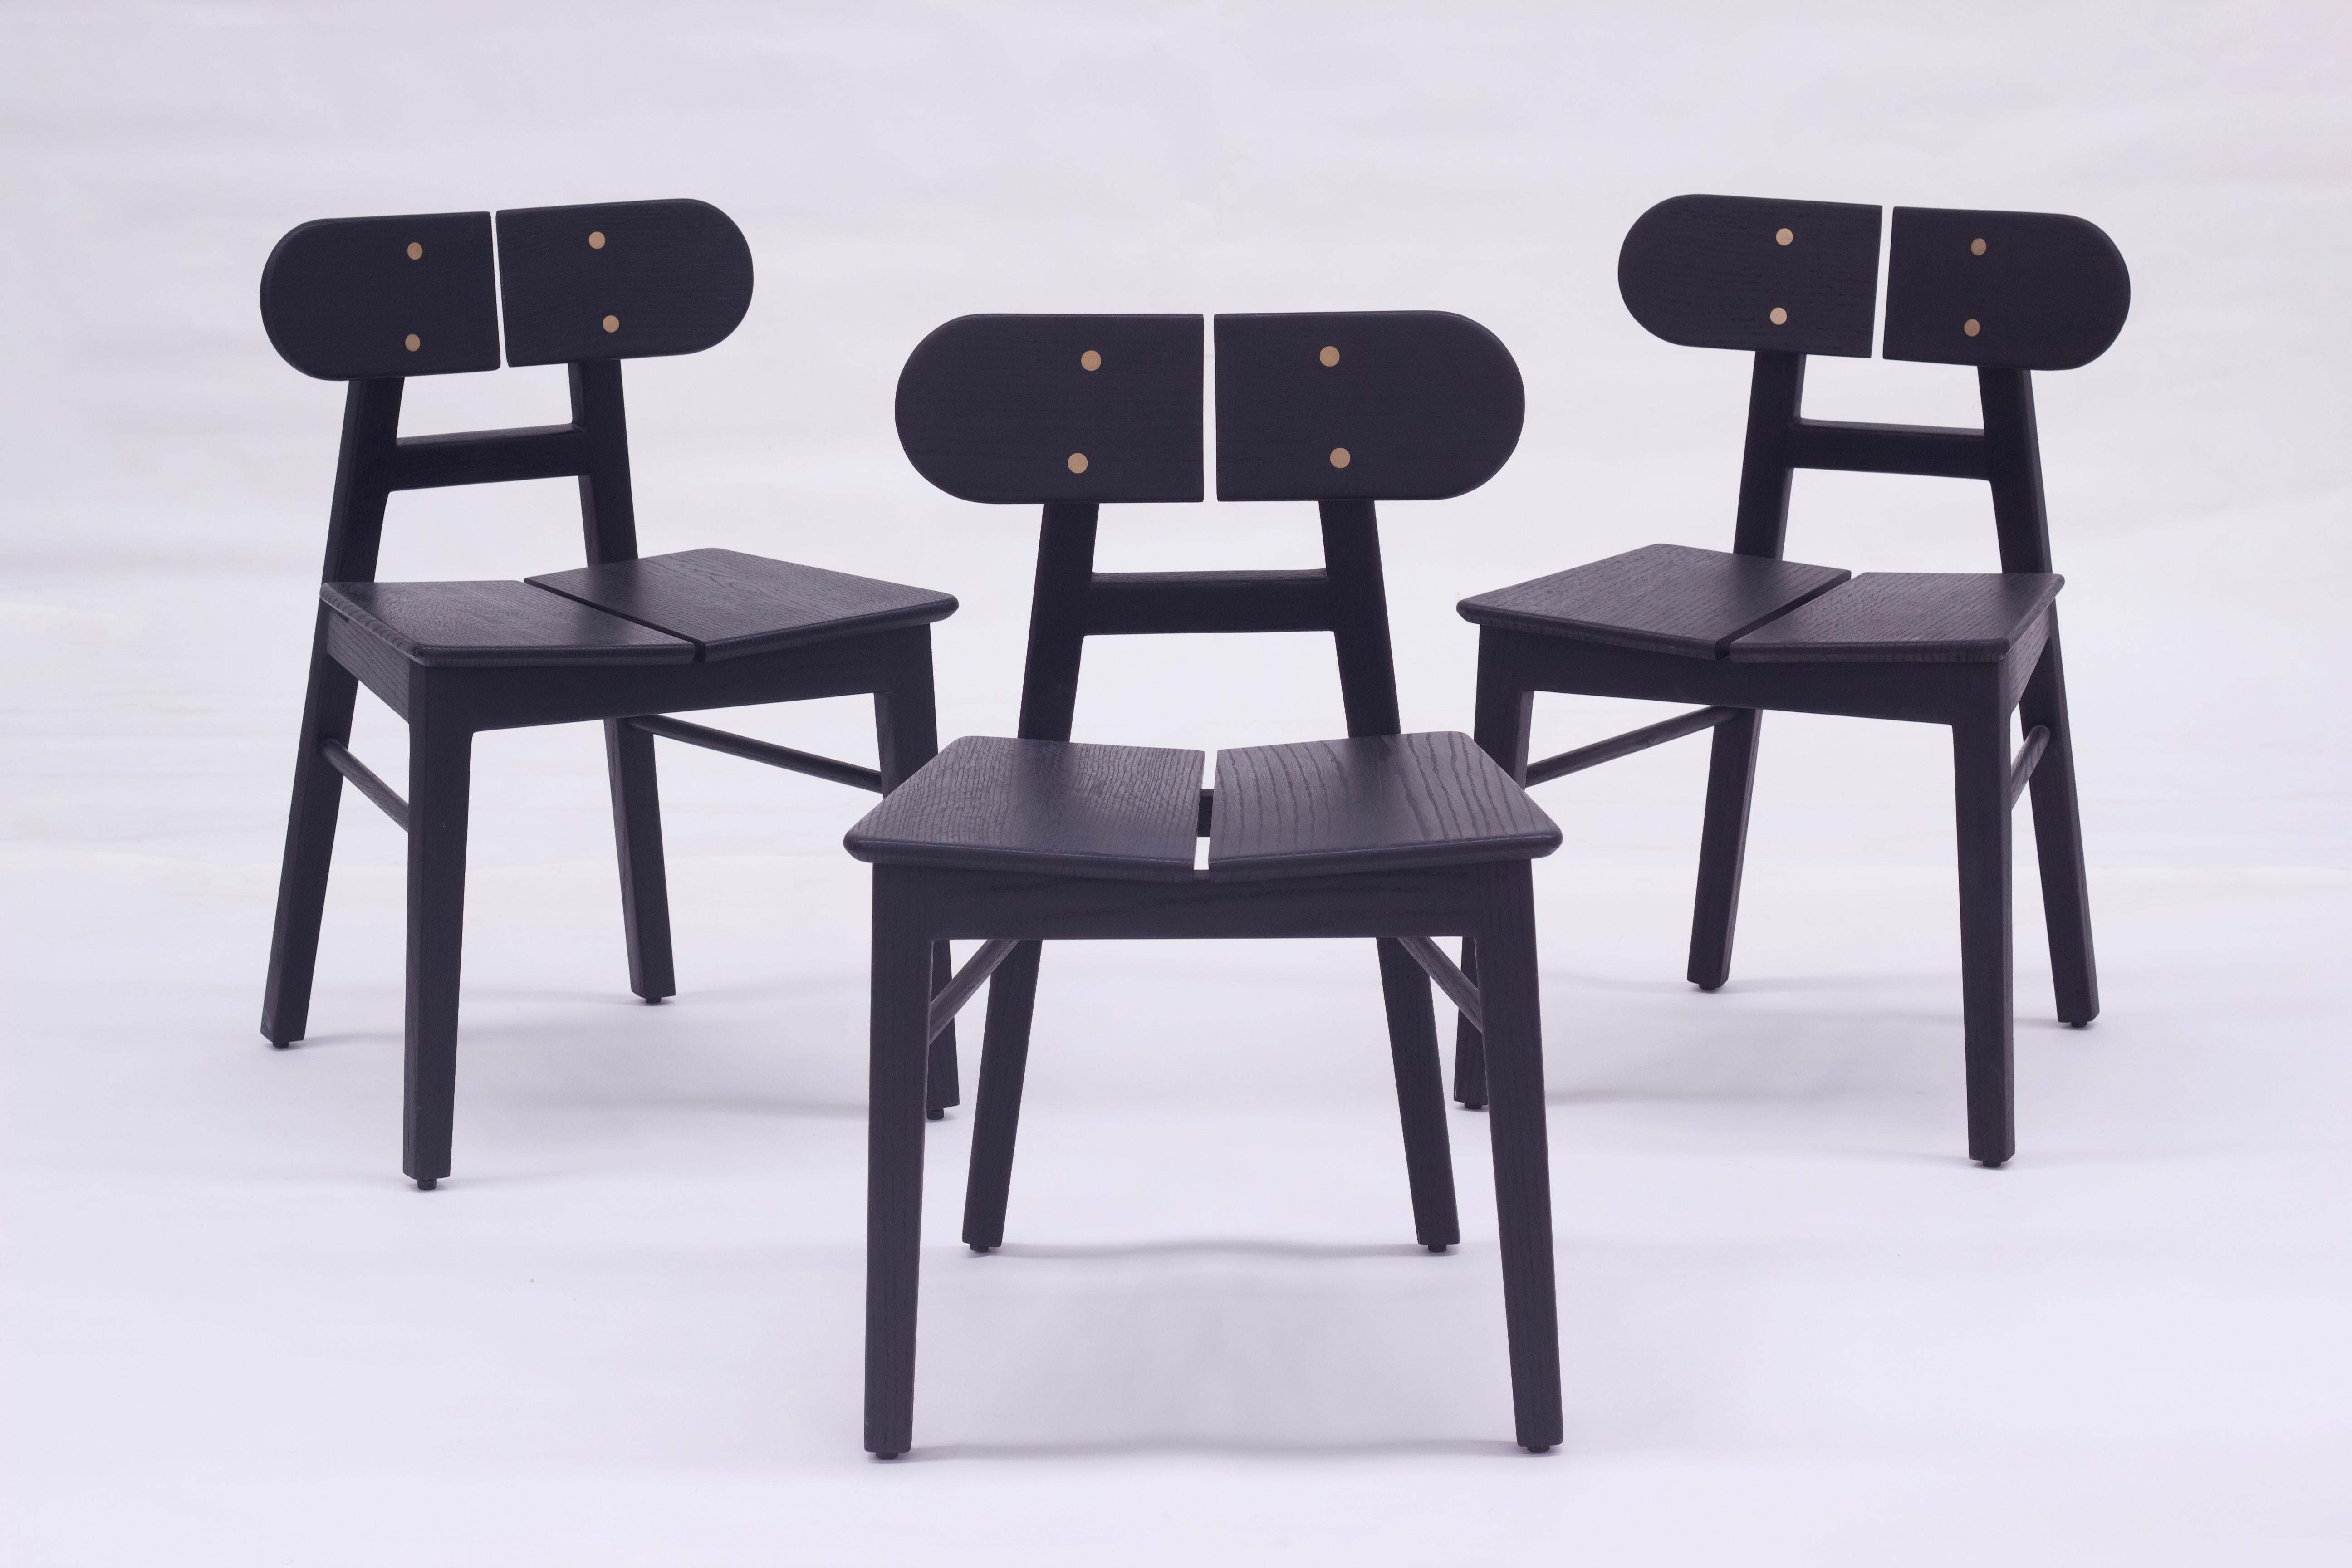 A set of 4 black solid Oak wood chairs crafted for comfort and a timeless aesthetic, the BUTTERFLY chair design is inspired by the beauty of a butterfly and developed through a design philosophy of conscious minimalism. The design makes a